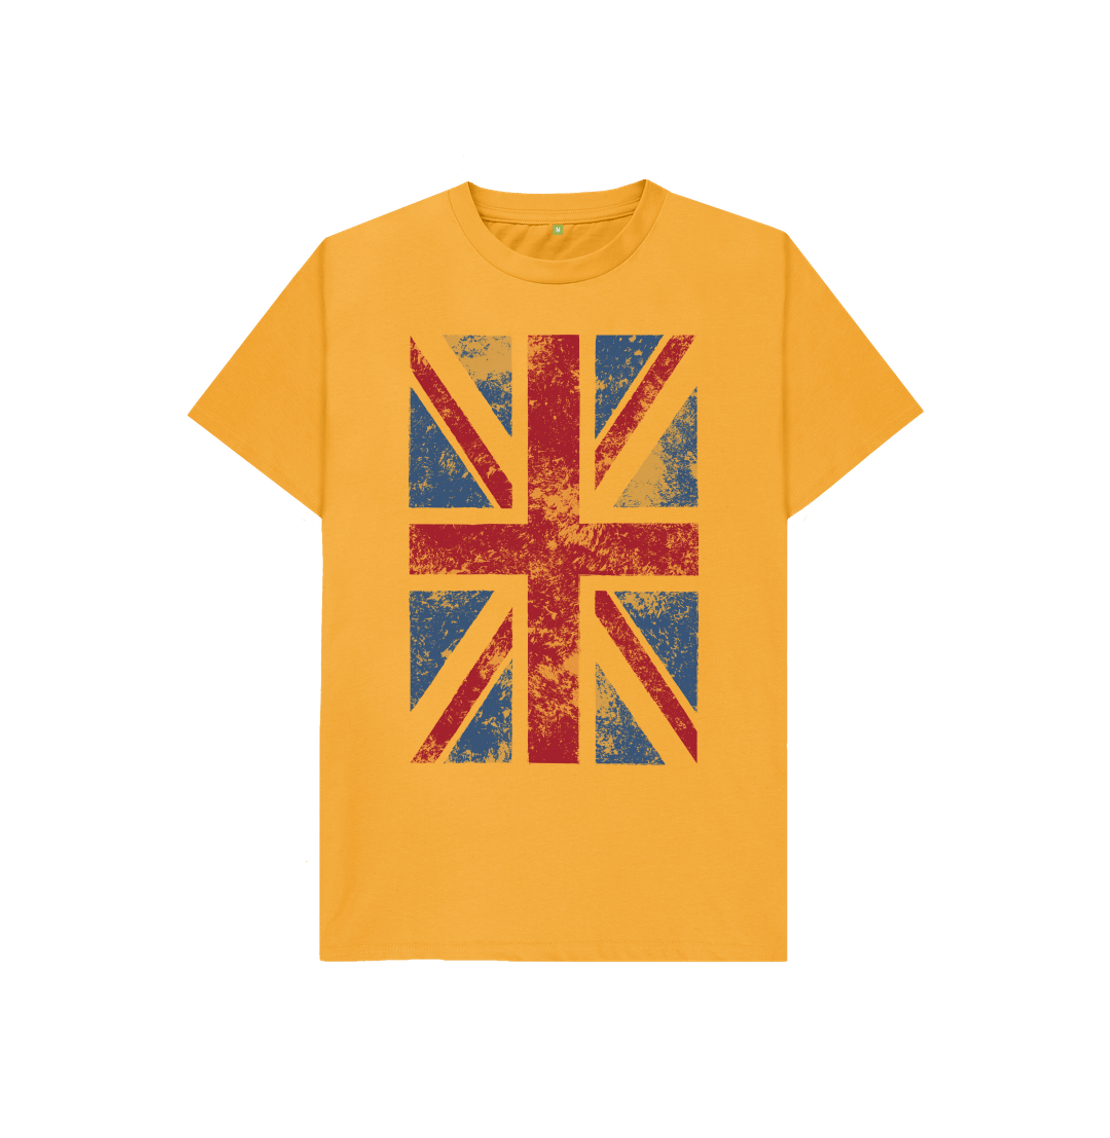 Online T-shirts from www.gardentsirts.co.uk